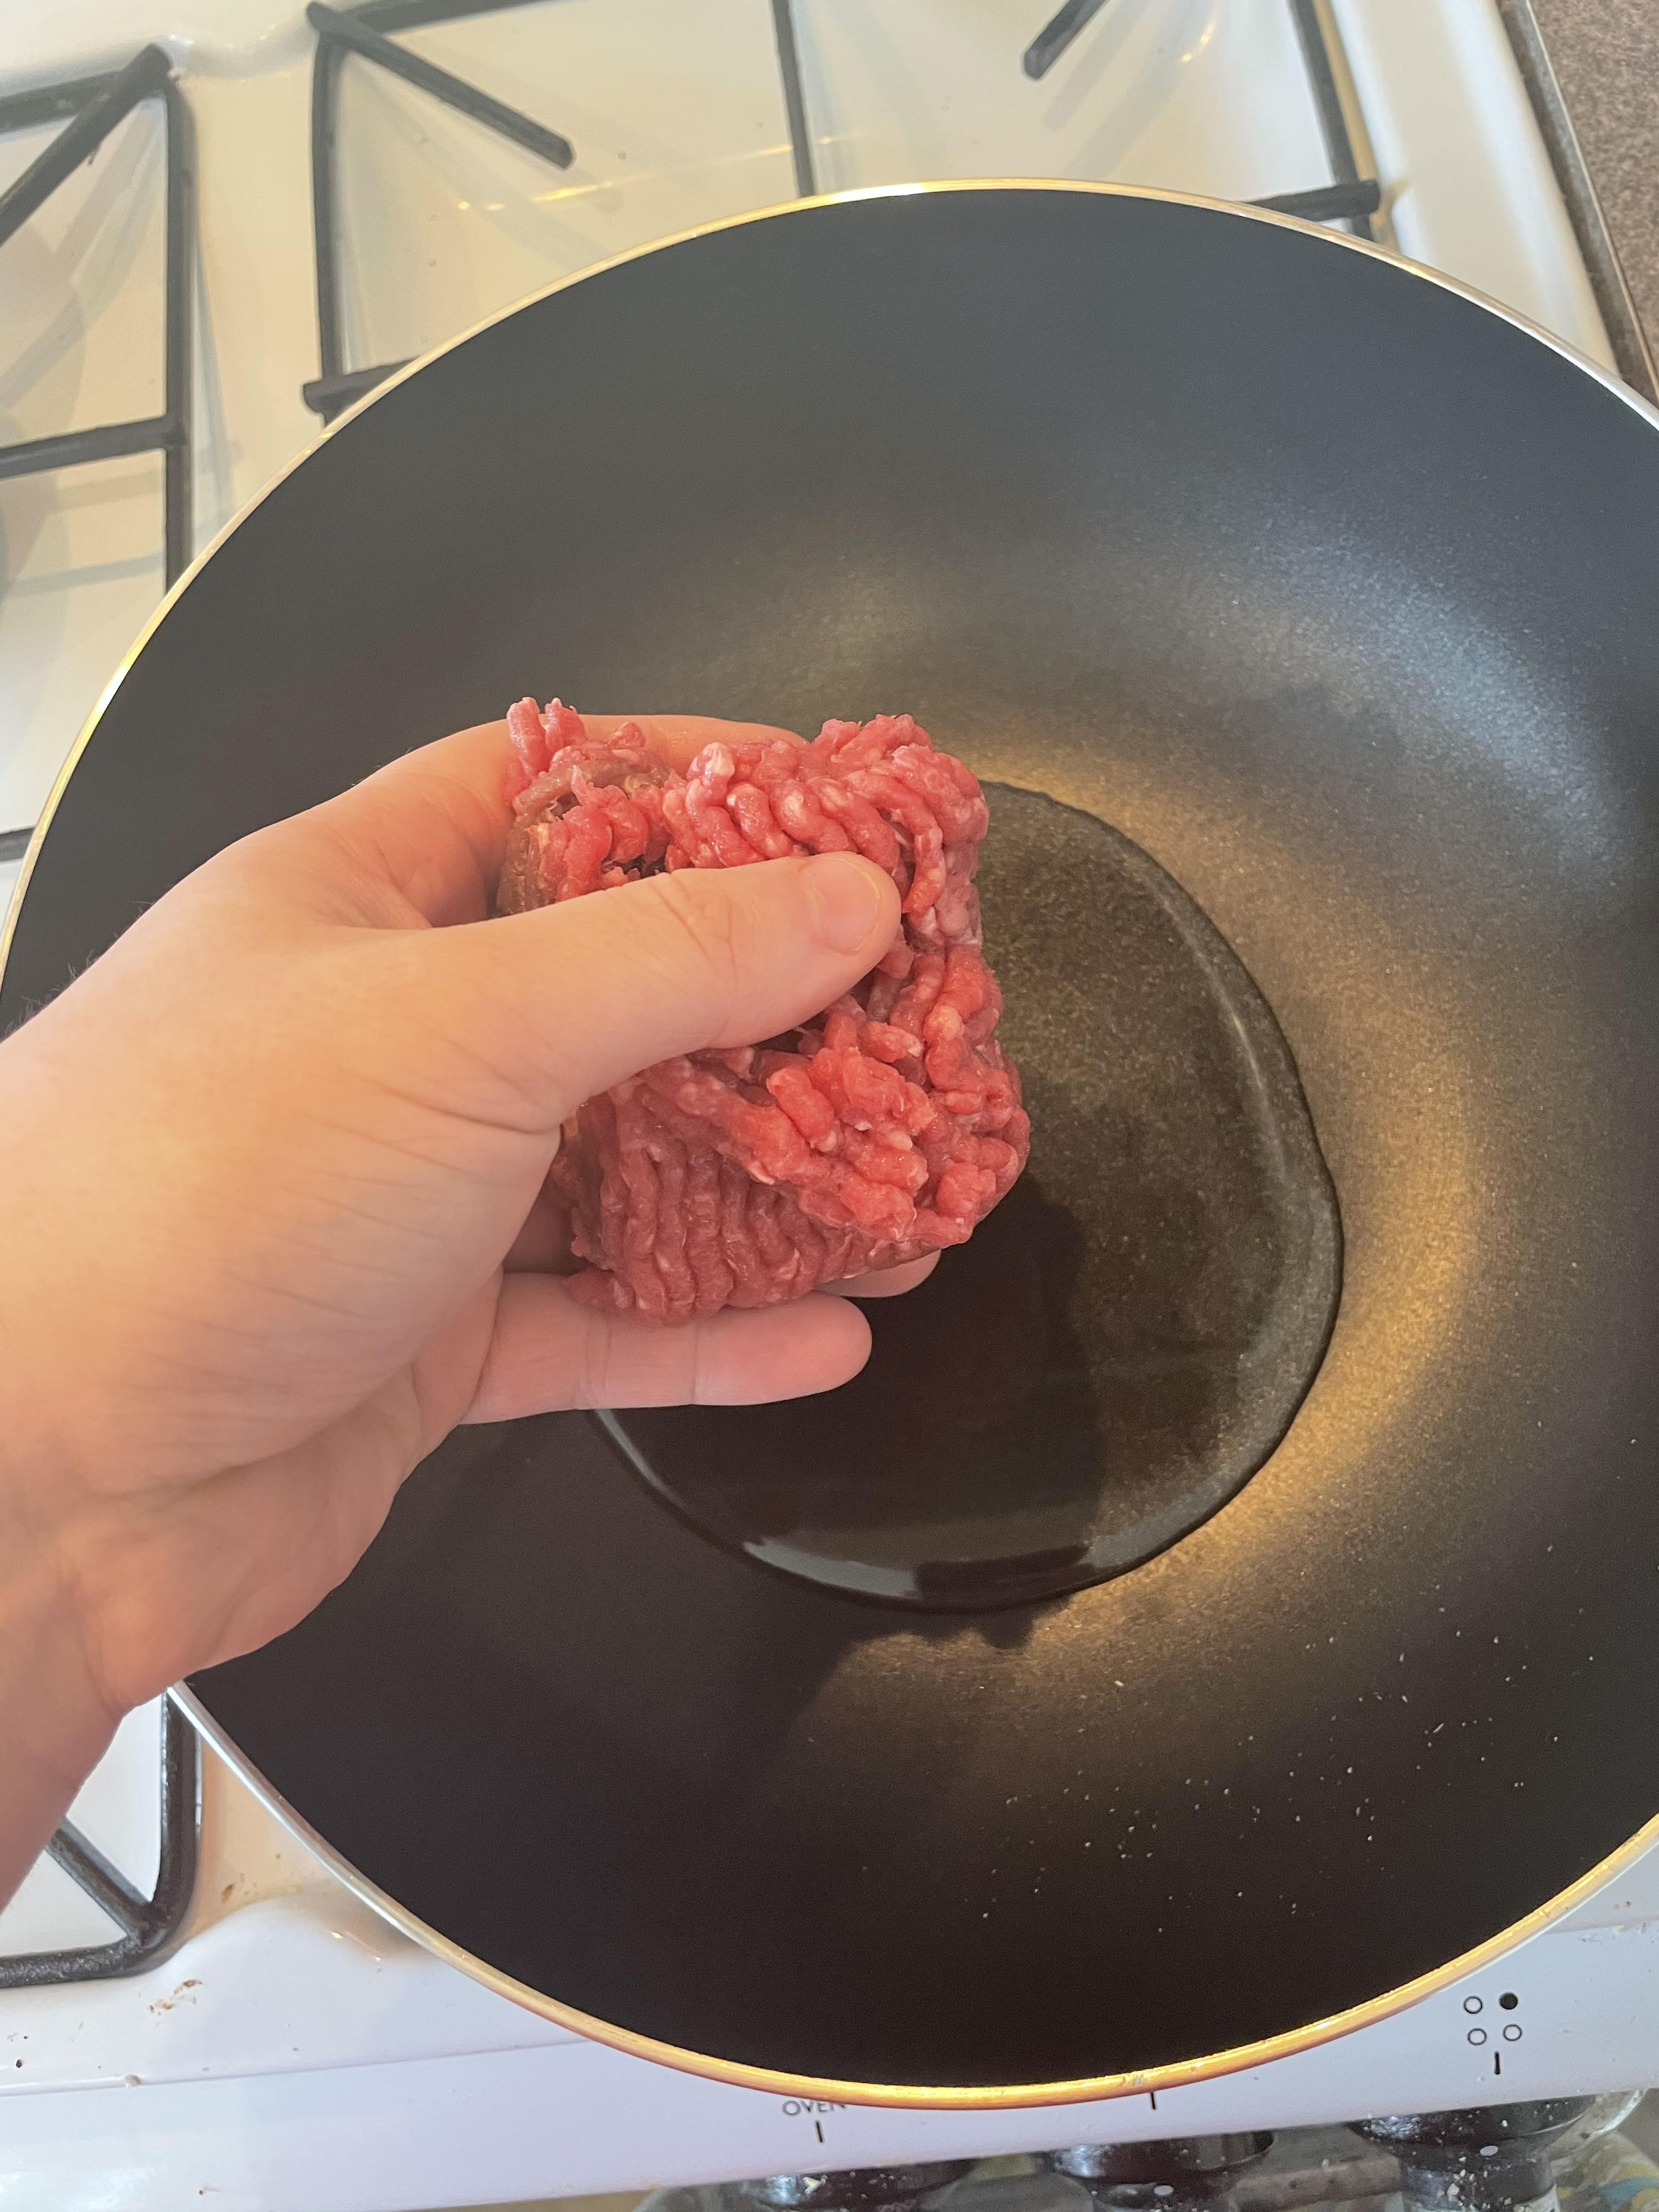 Now for the relaxing bit, add some olive oil to a frying pan and fry the mince adding a handful at a time until all brown through out once you have fried all the mince drain the excess water out and put this to one side.